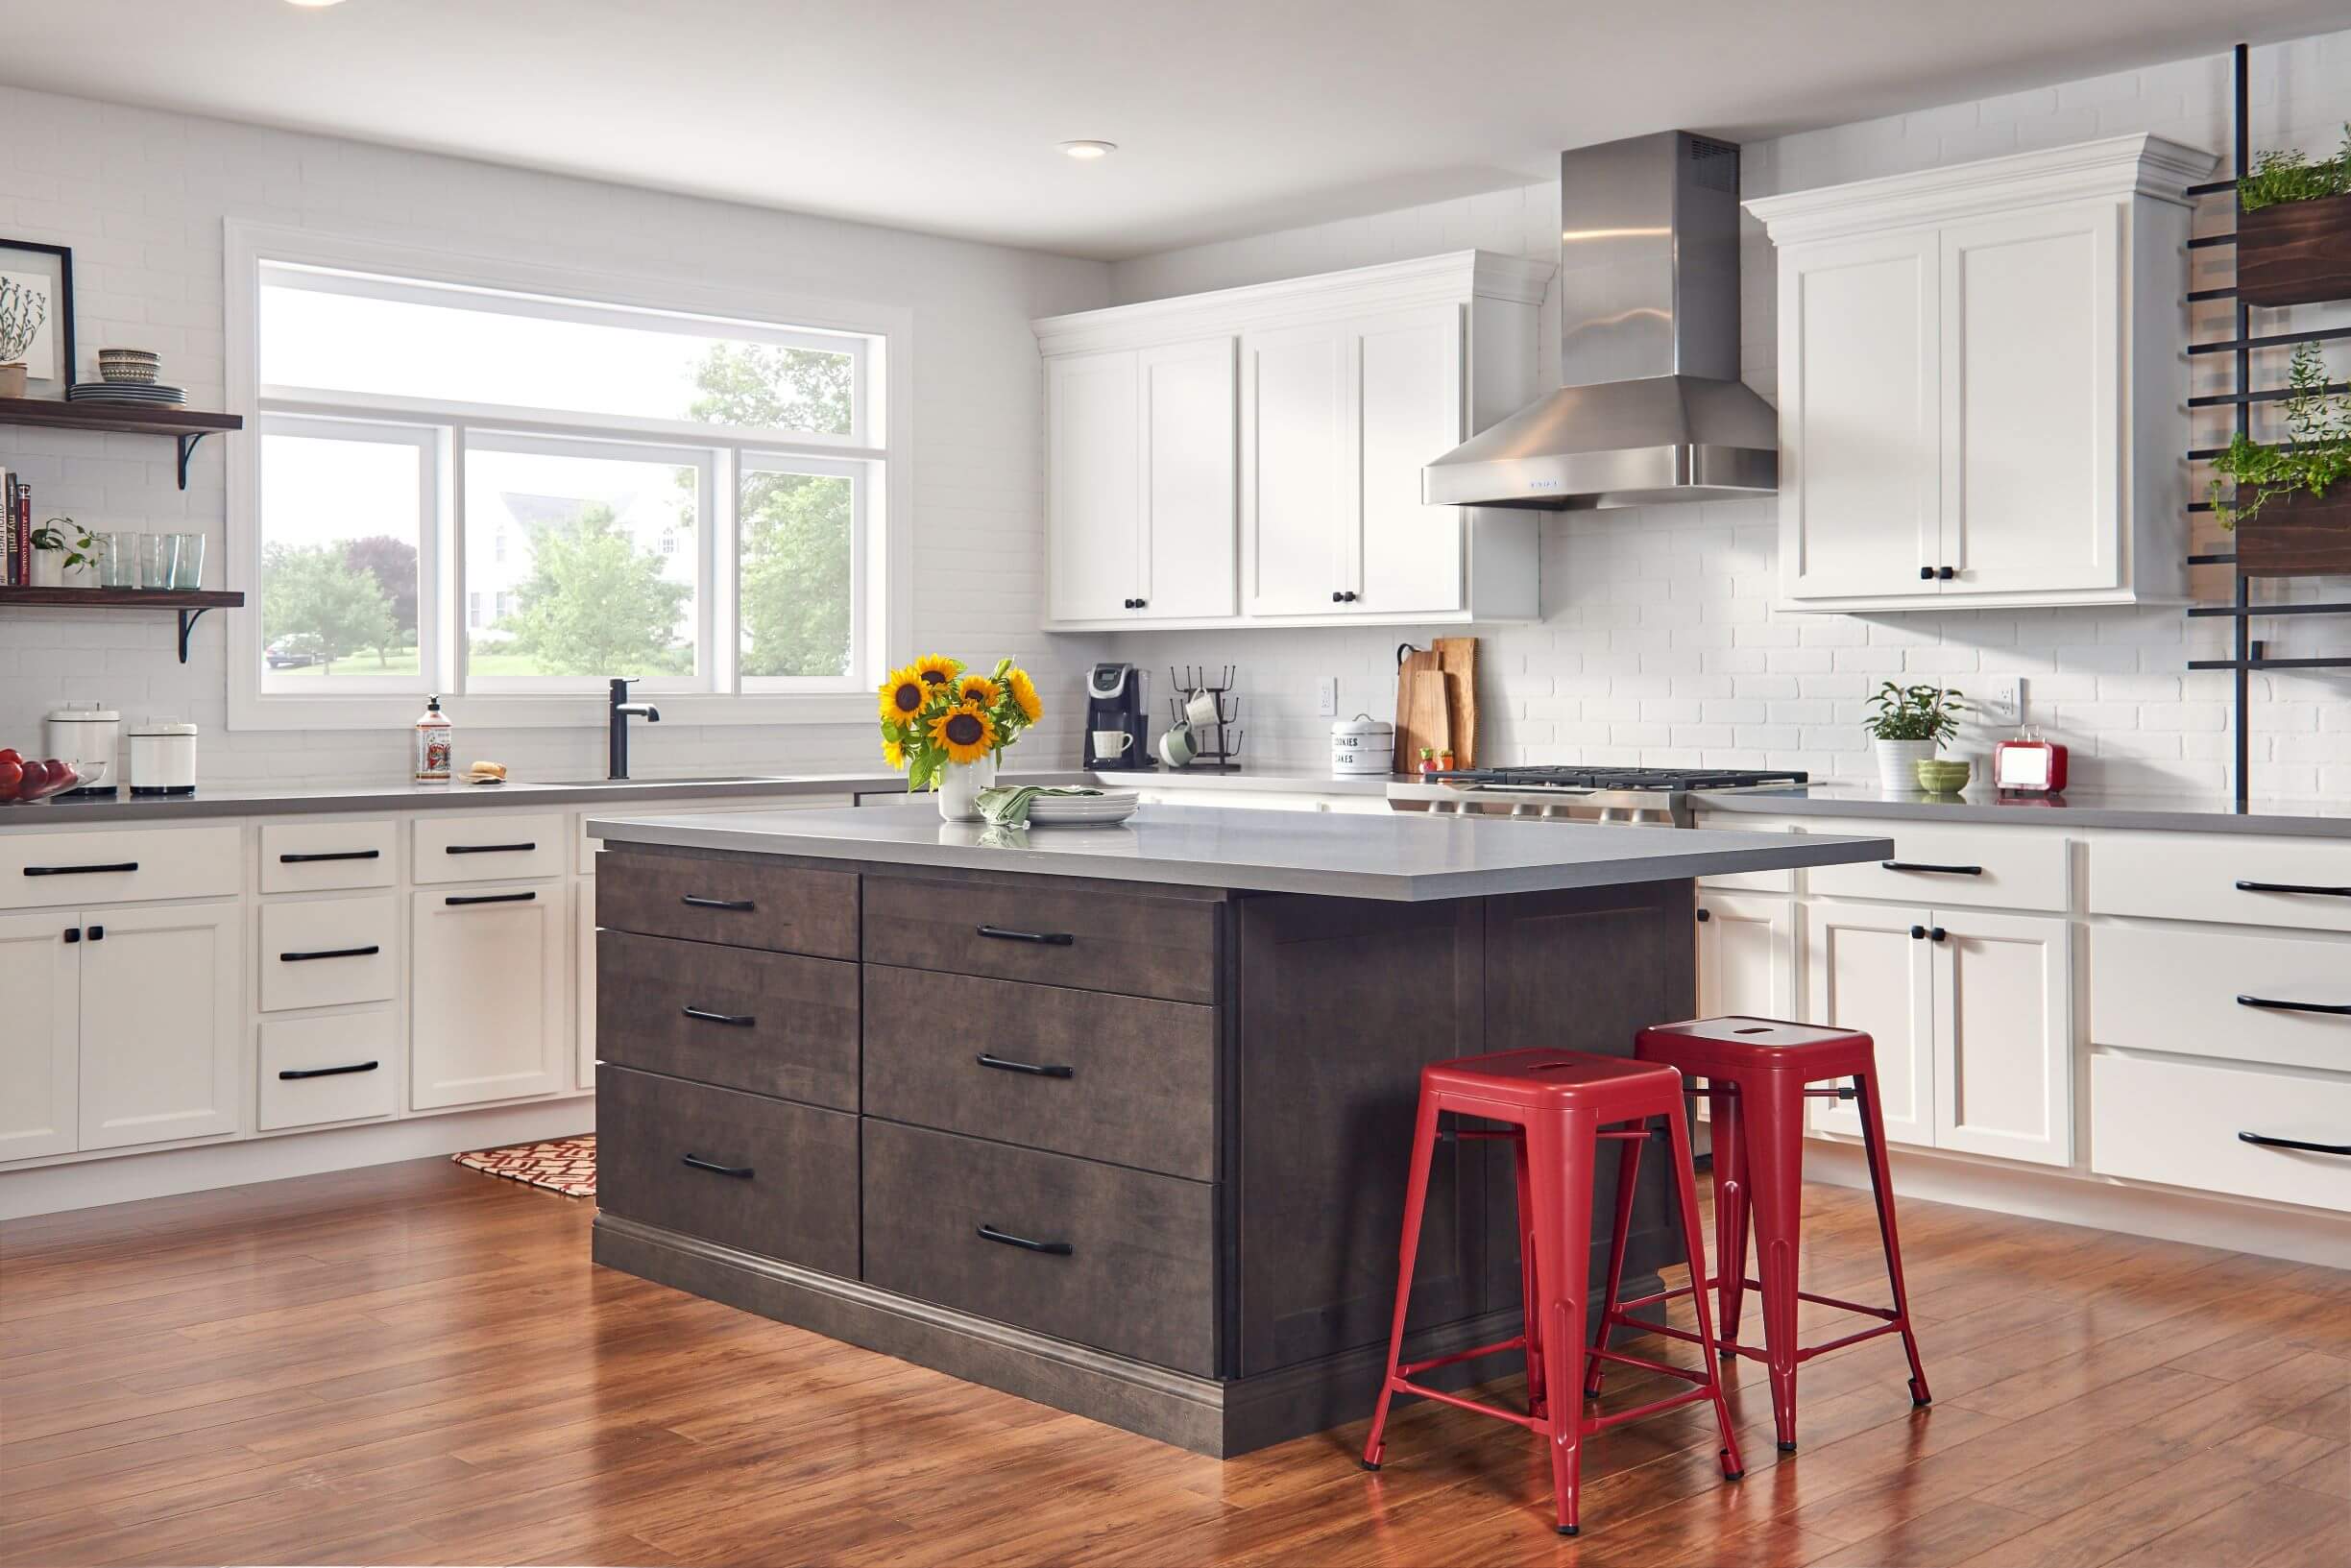 Mix and Match Kitchen Cabinet Styles with Quick Ship Kitchens